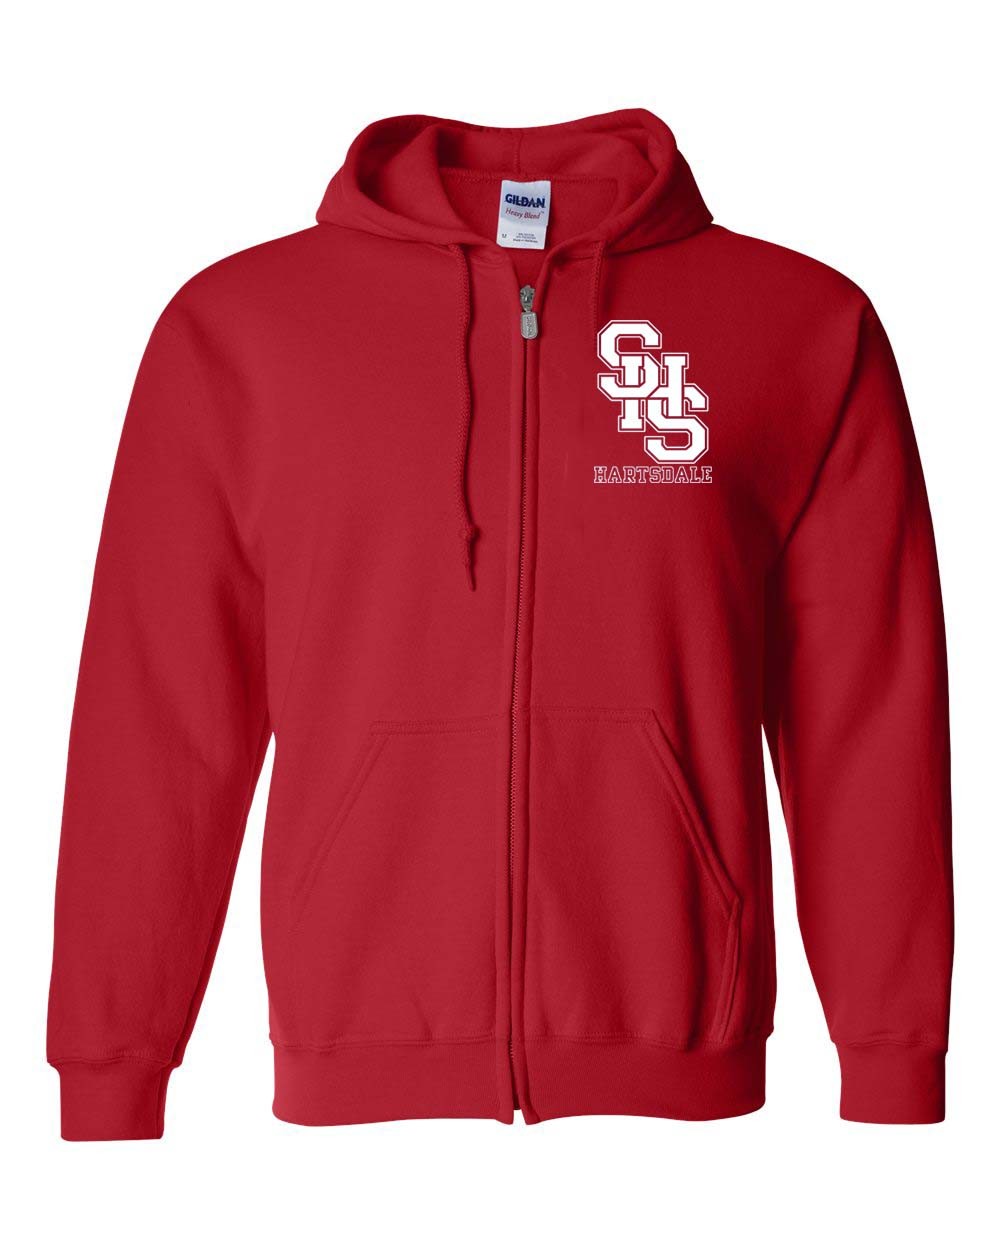 SHS Staff Zipper Hoodie w/ Logo - Please Allow 2-3 Weeks for Delivery